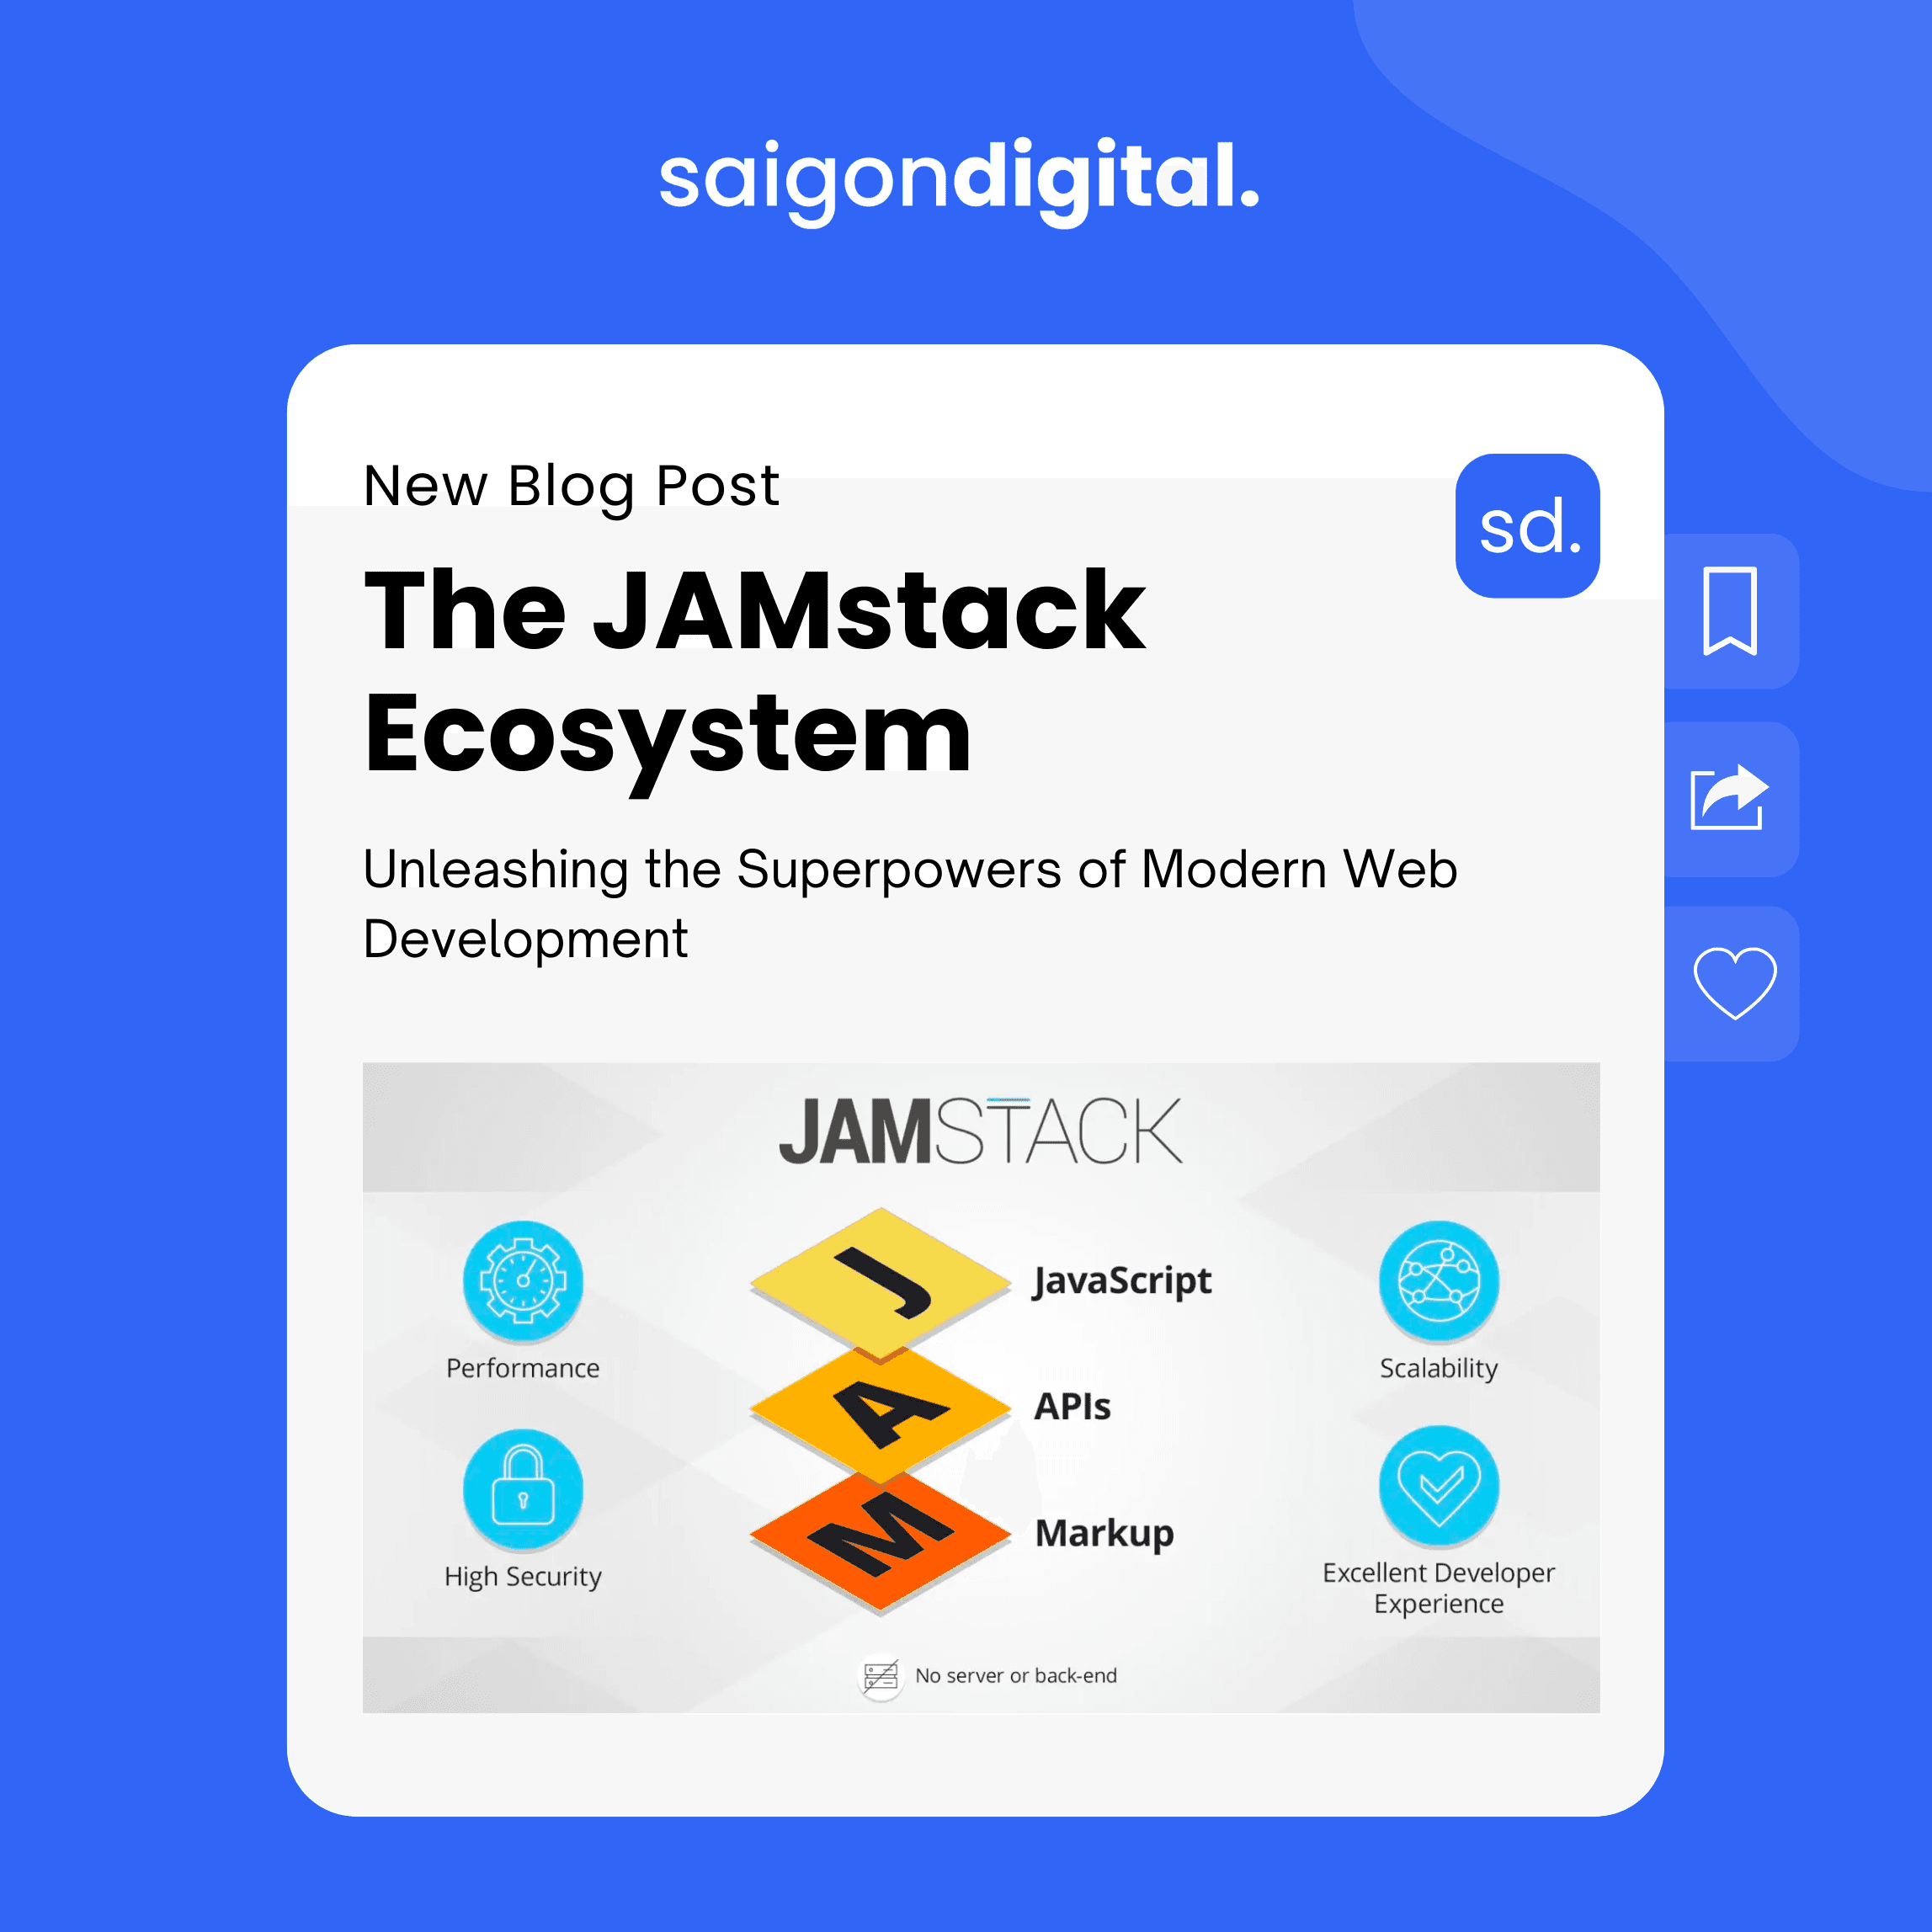 The JAMstack Ecosystem: Unleashing the Superpowers of Modern Web Development